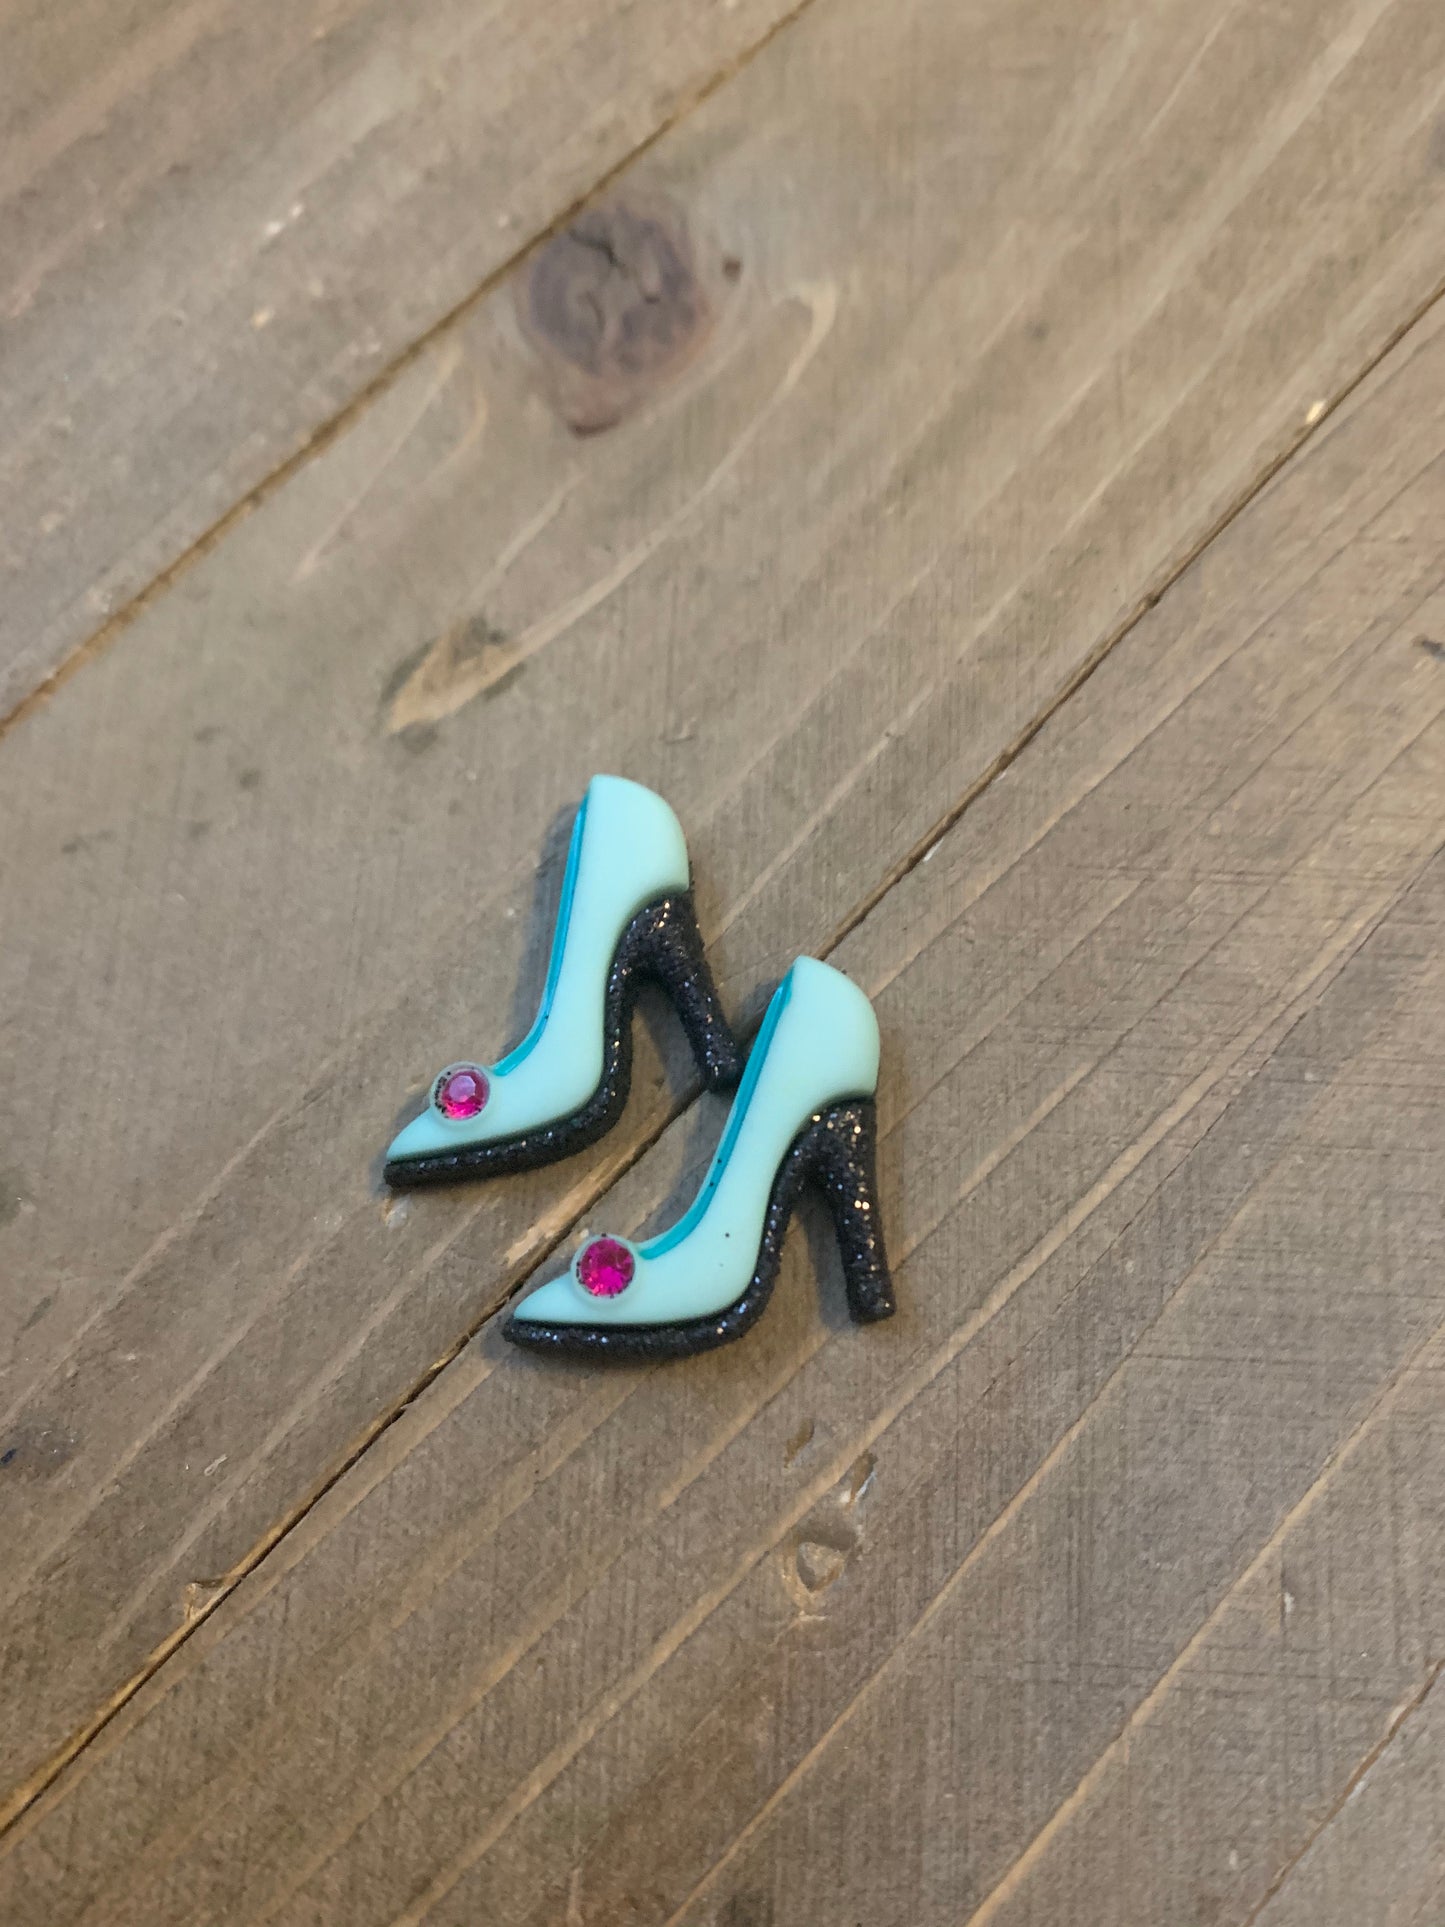 Fashionable High heel  Post Earrings that special shoePink tiful of LOVE